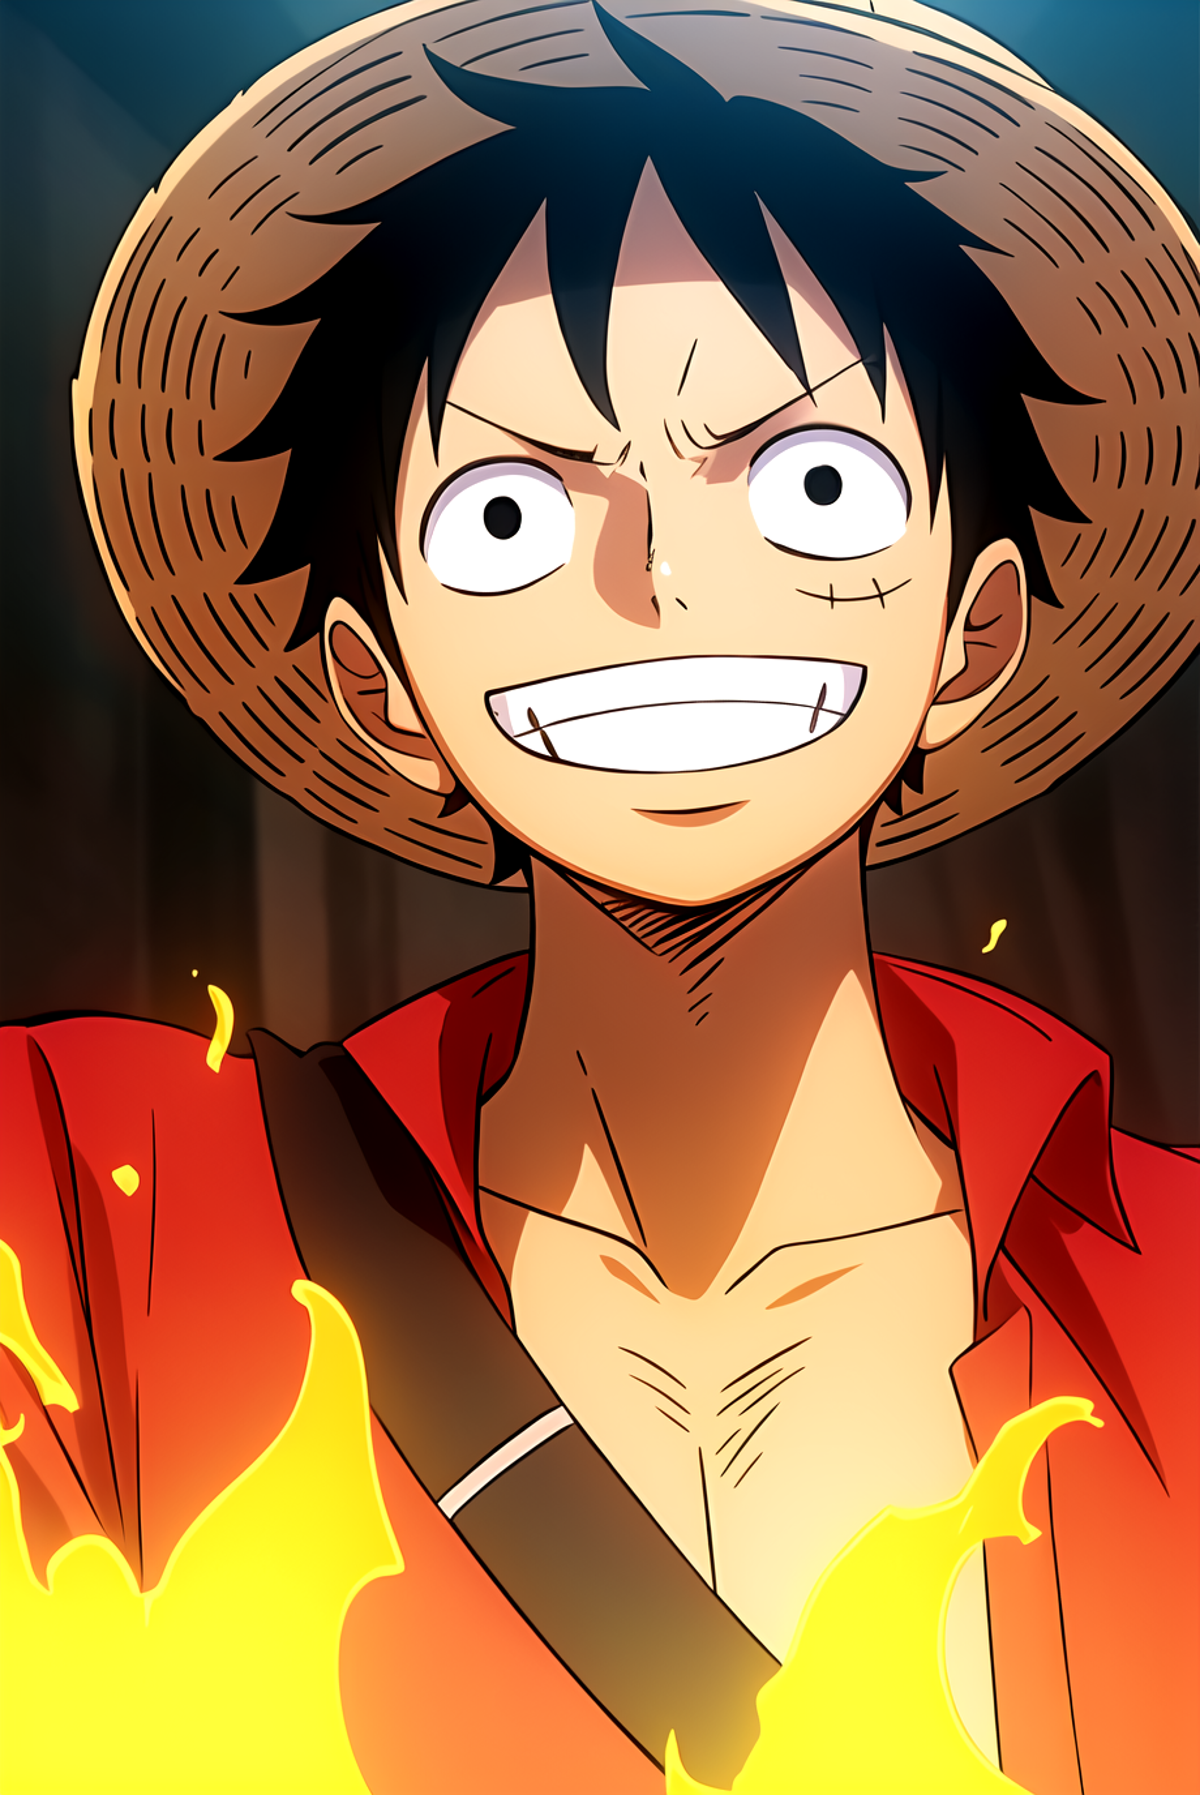 A smiling cartoon character wearing a straw hat.